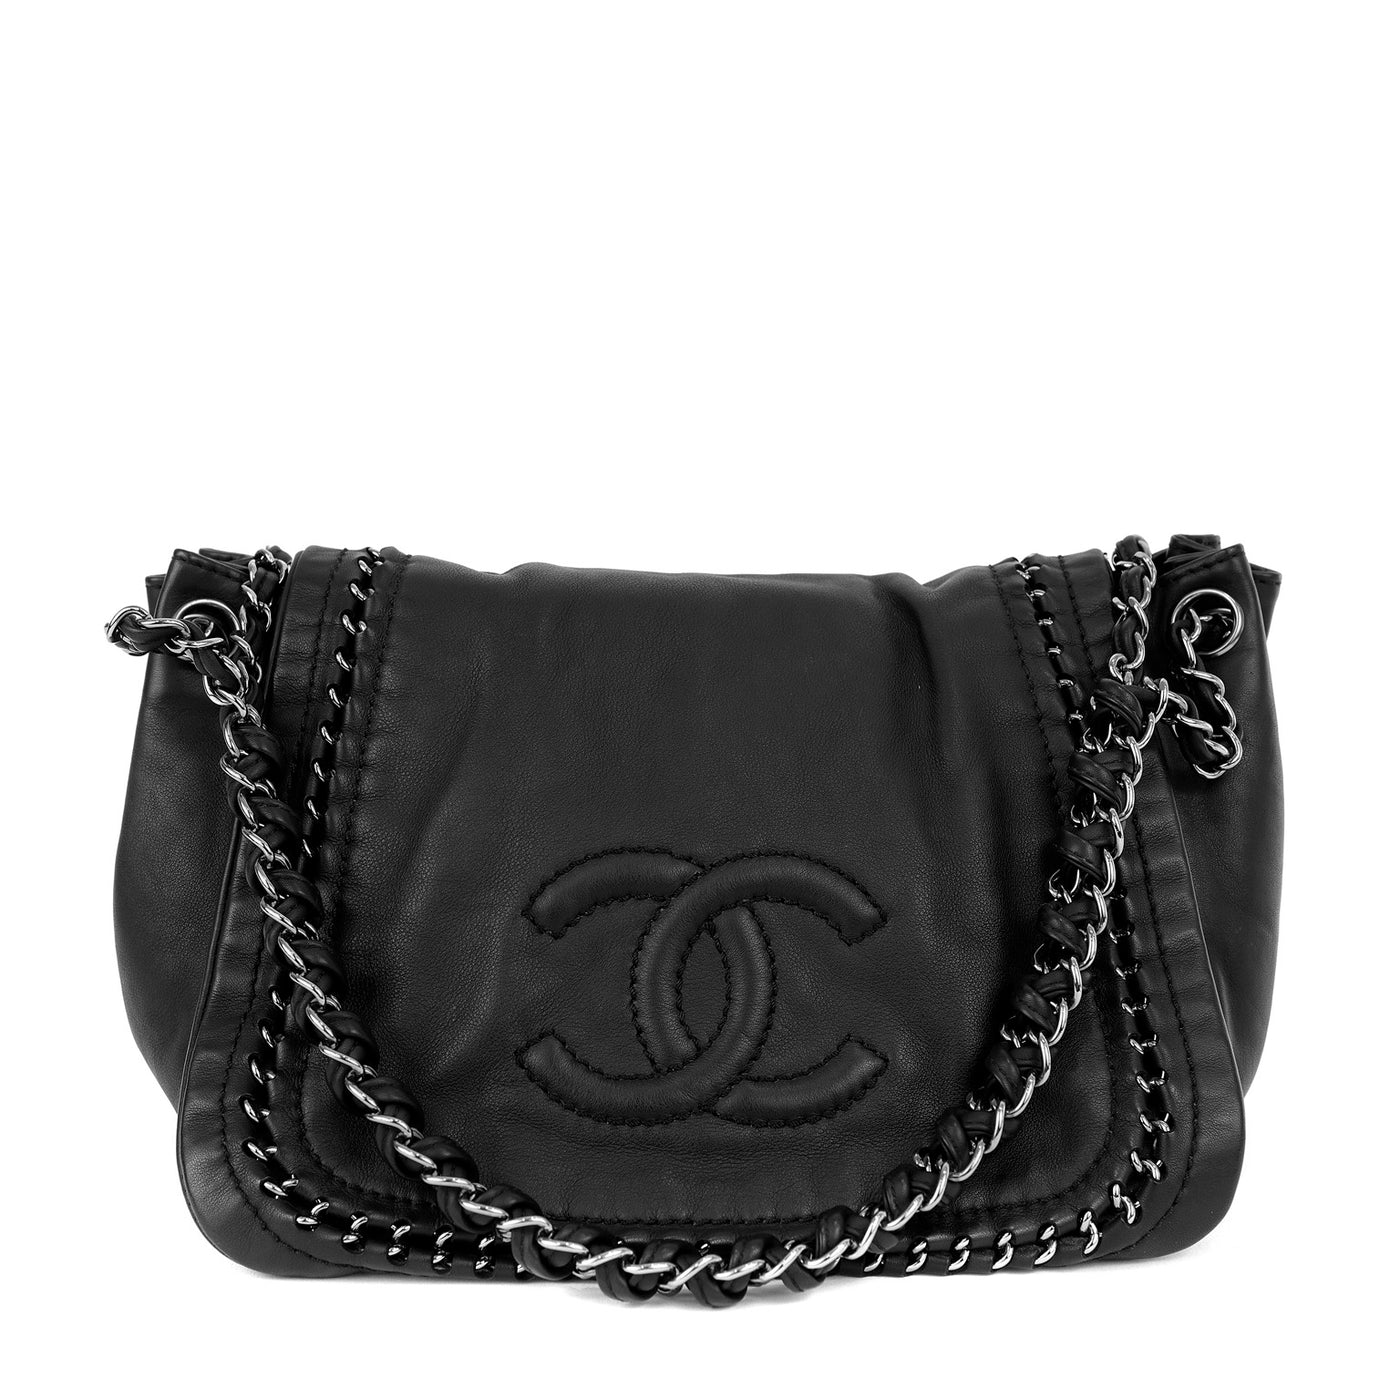 Chanel Black Lambskin Flap Bag with All Around Silver Chain